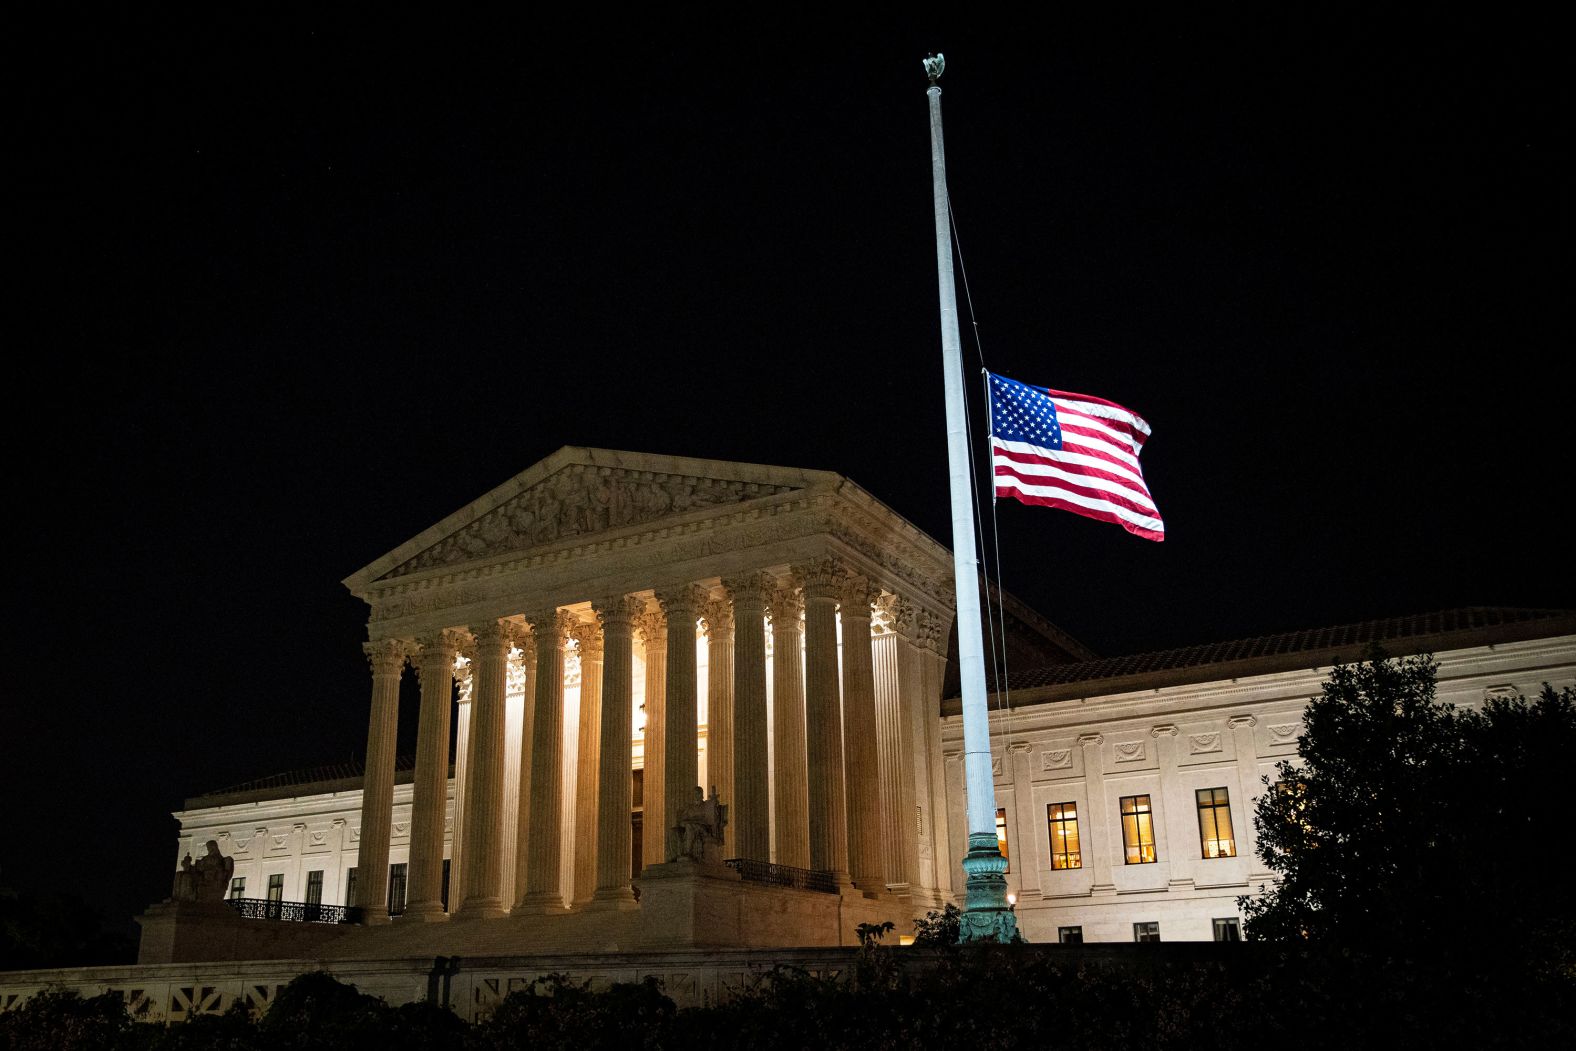 The American flag flies at half-staff outside the Supreme Court on September 18.